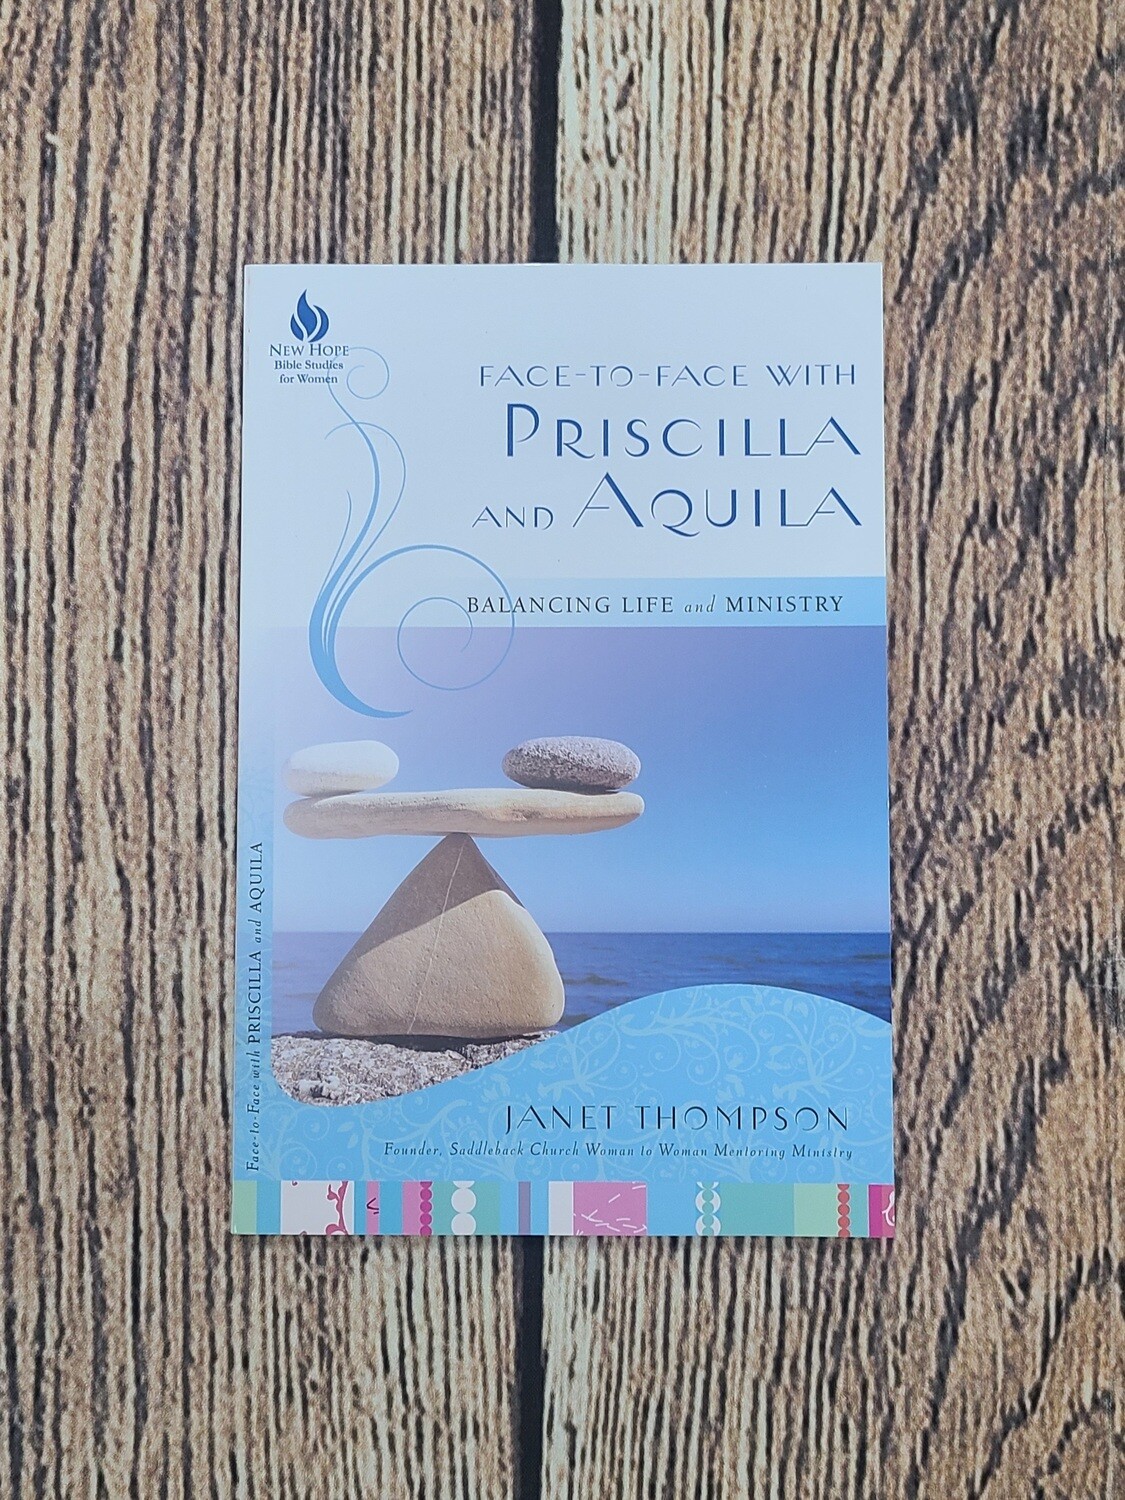 Face-To-Face with Priscilla and Aquila: Balancing Life and Ministry by Janet Thompson - Paperback - New